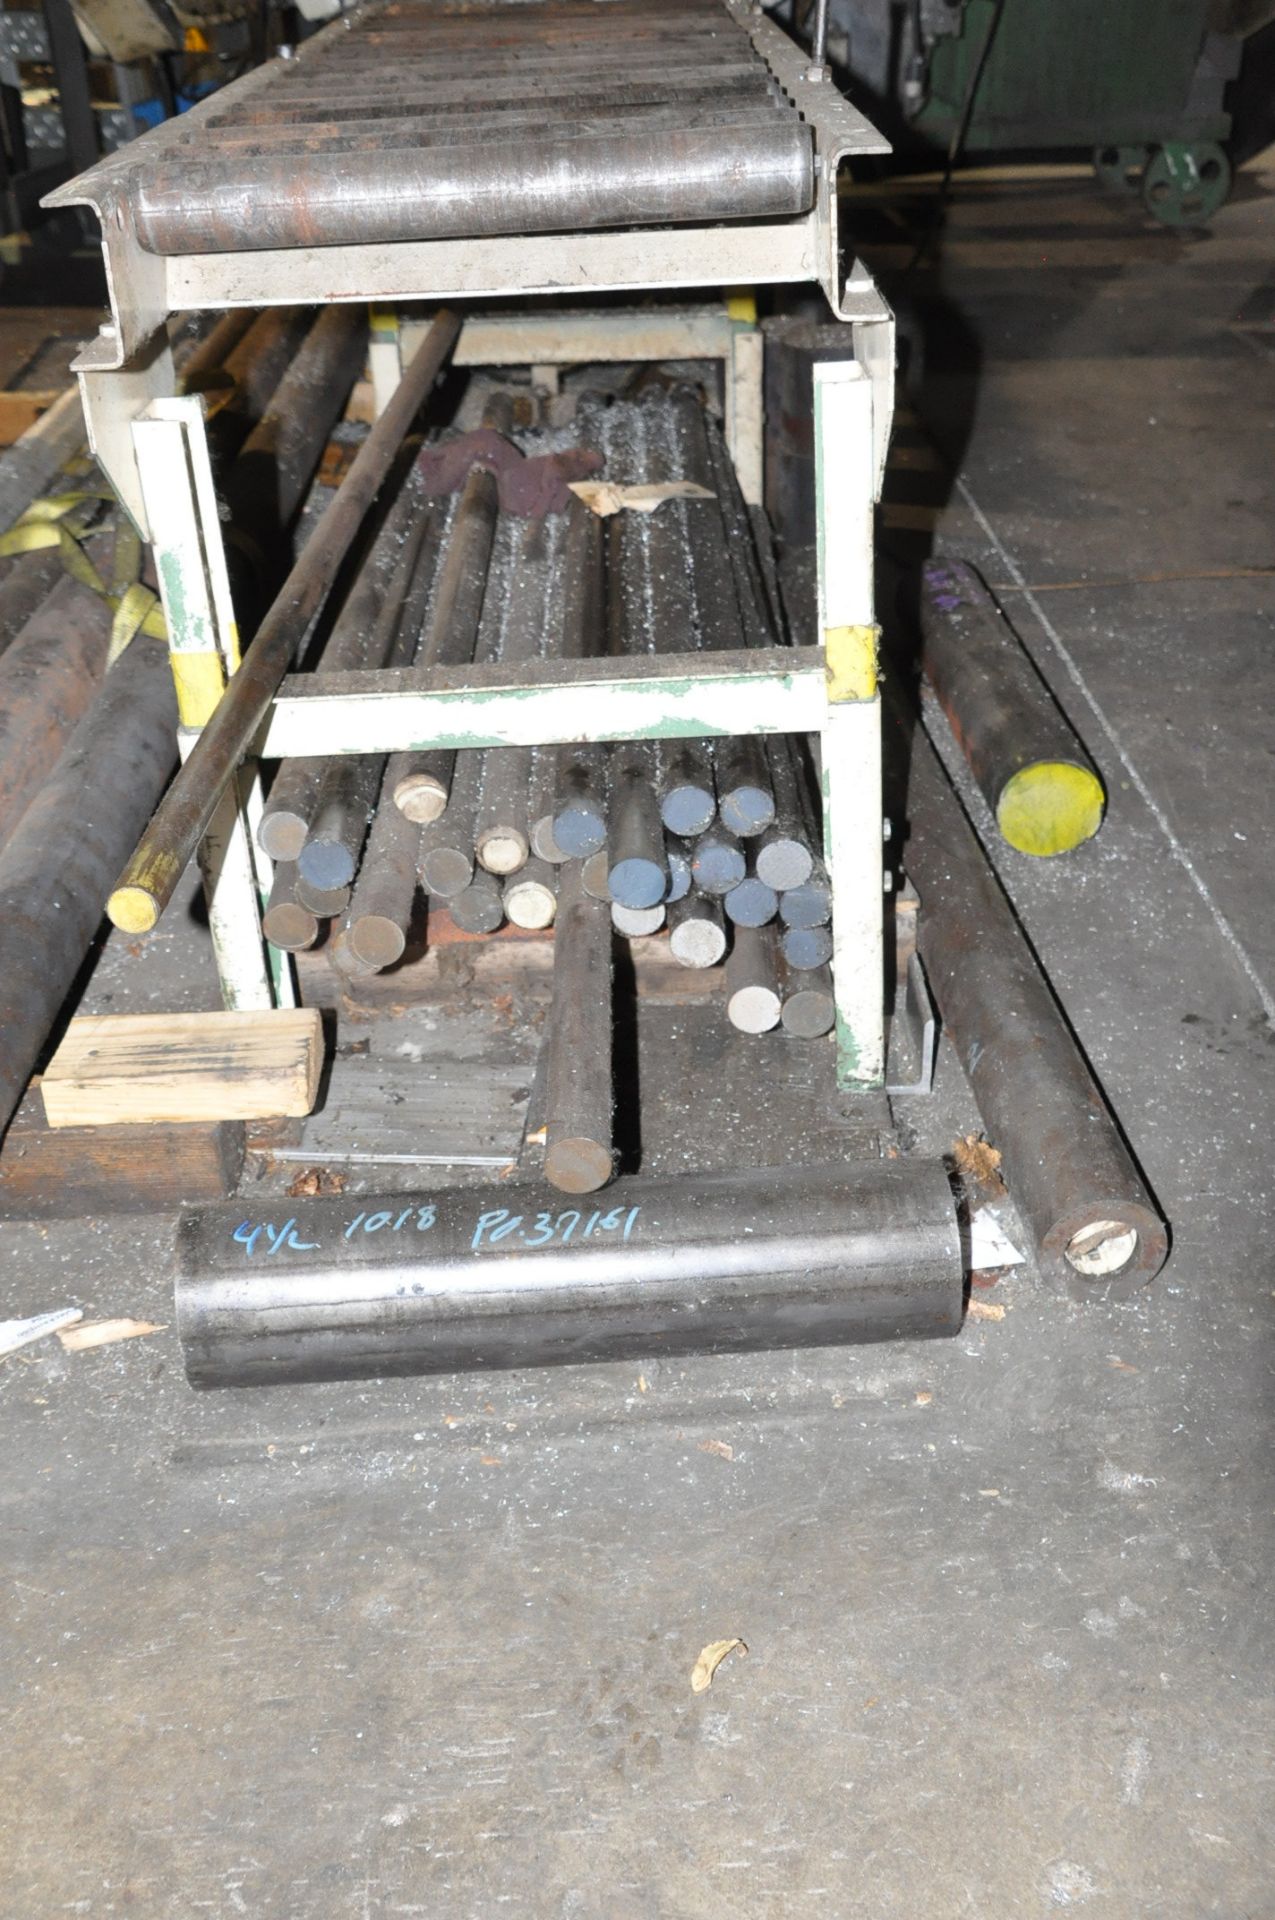 Lot-Solid Round Stock and Flat Bar Stock in (2) Groups on Floor - Image 4 of 5